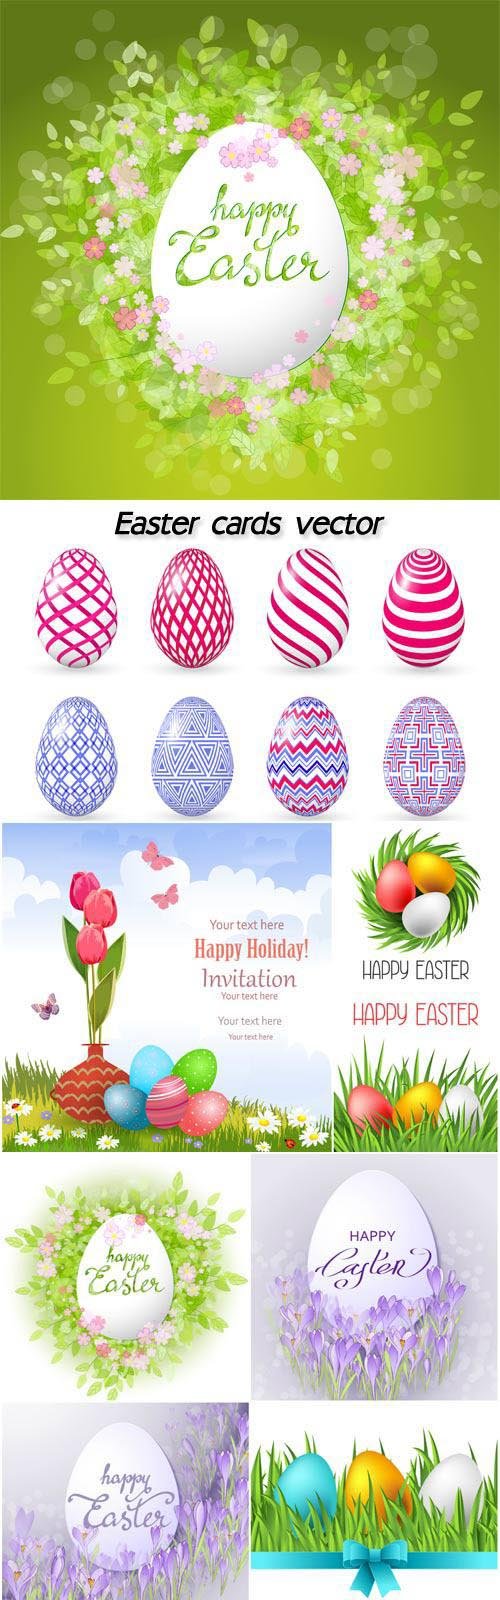 Easter cards vector, spring flowers